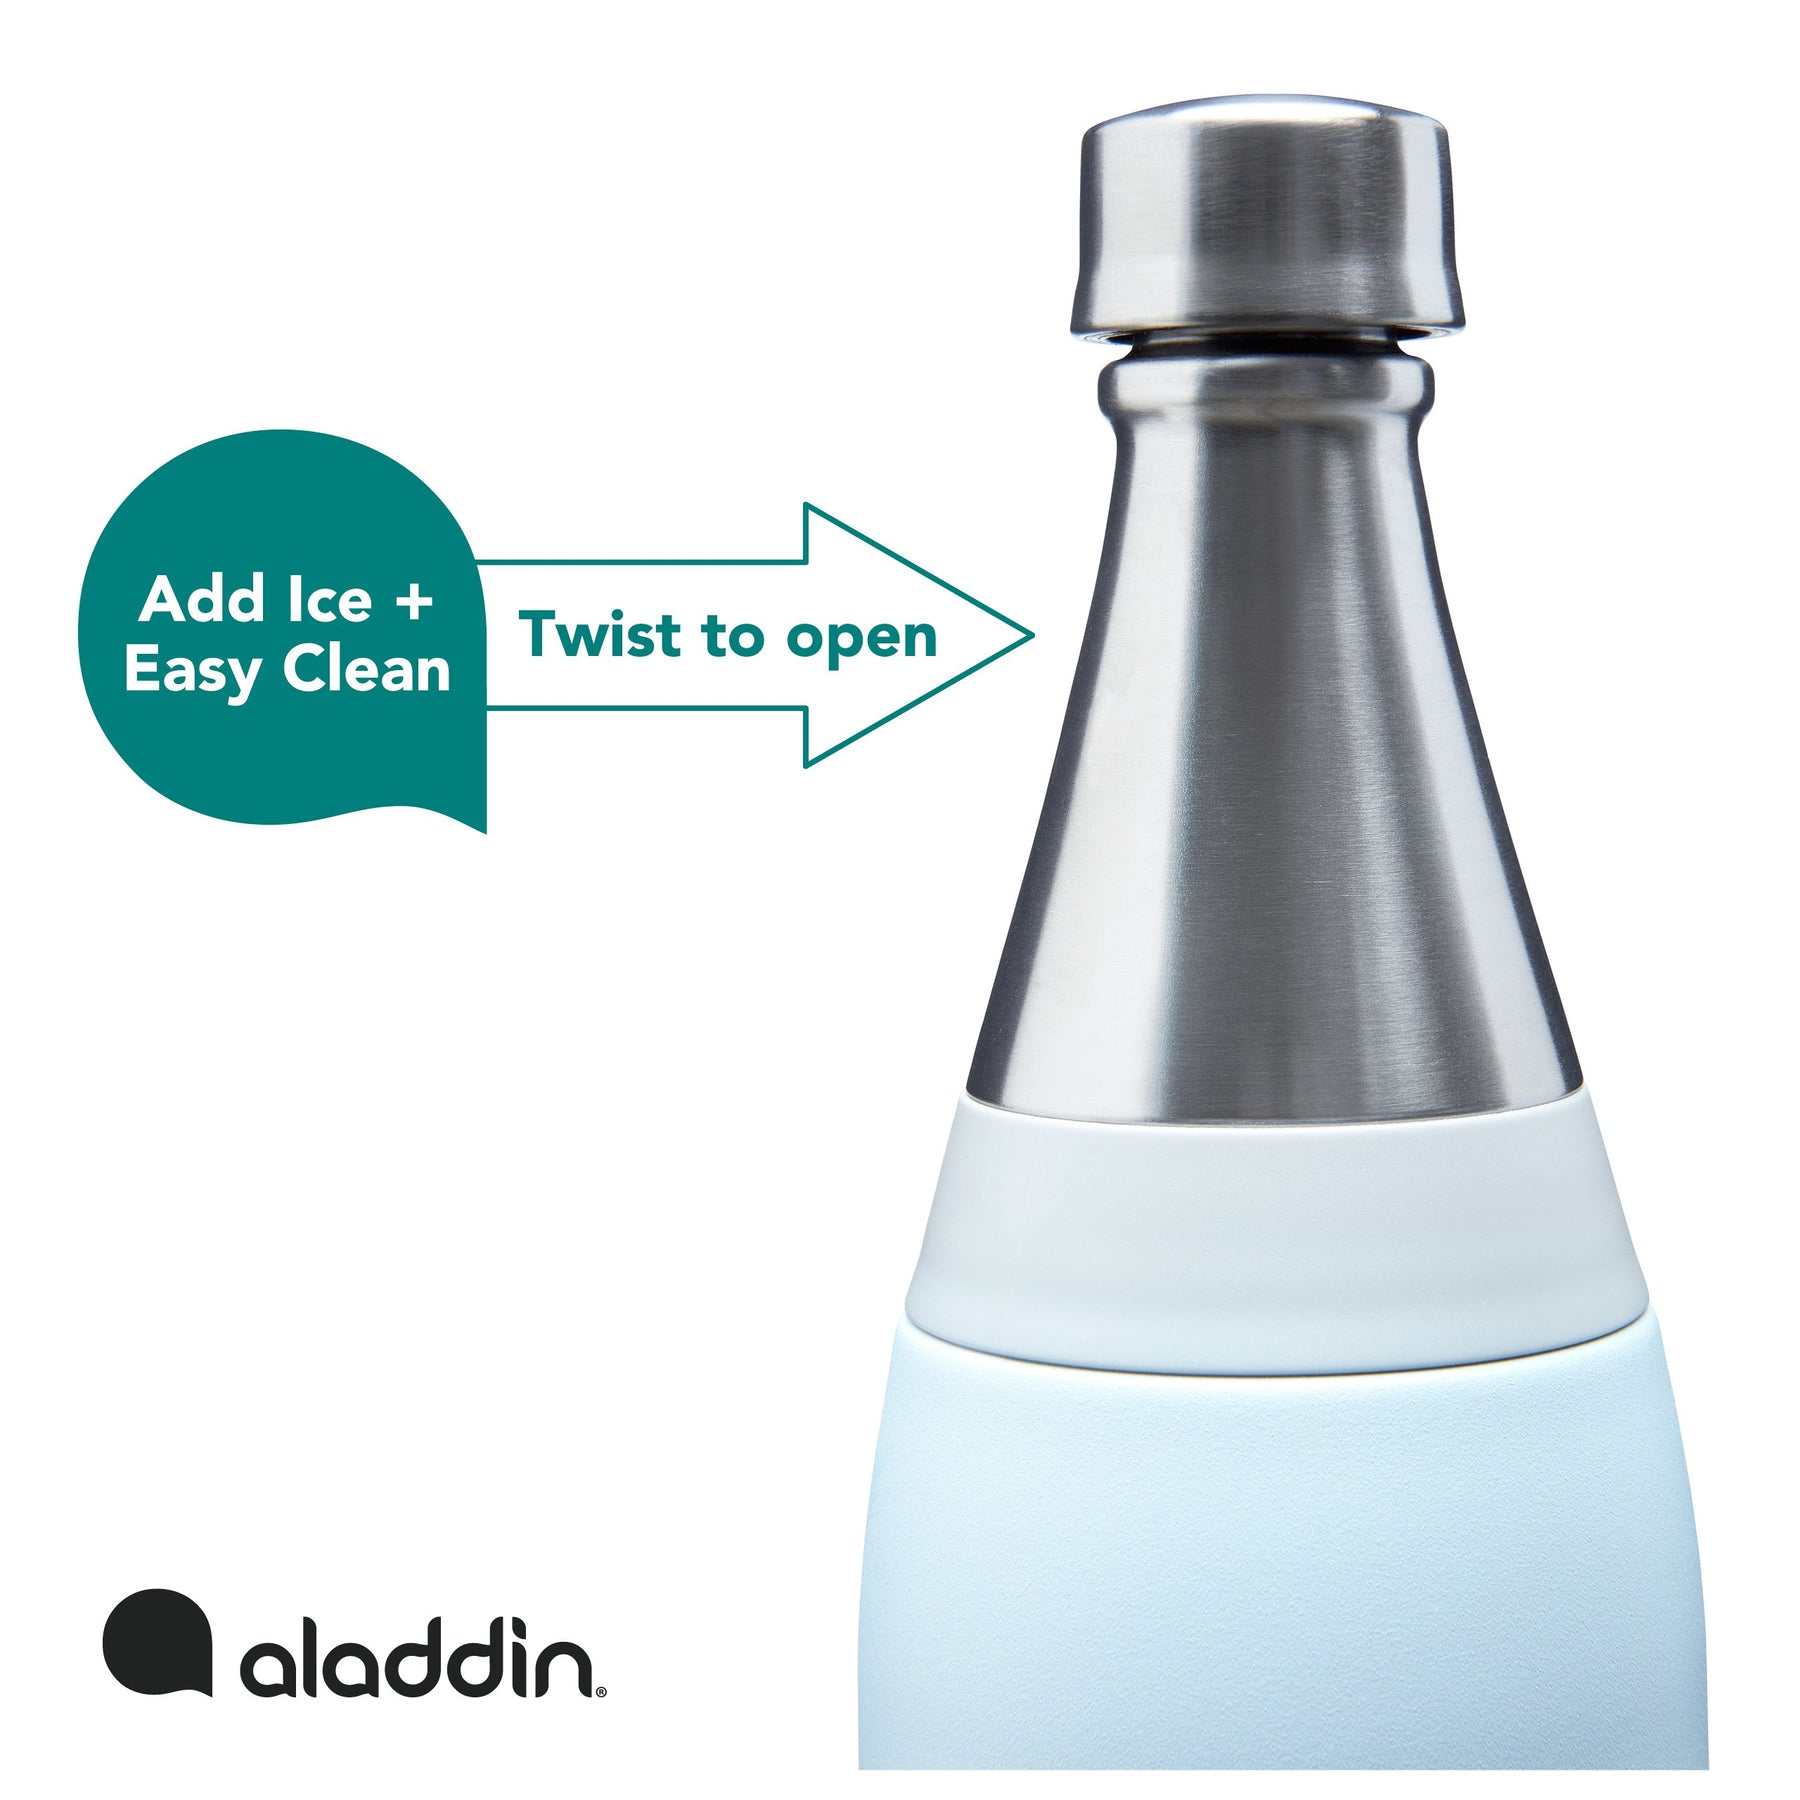 Aladdin-Fresco-Thermavac_-Stainless-Steel-Water-Bottle-0.6L-Sky-Blue-10-10098-007-Two-Way-Lid-Front_1800x1800